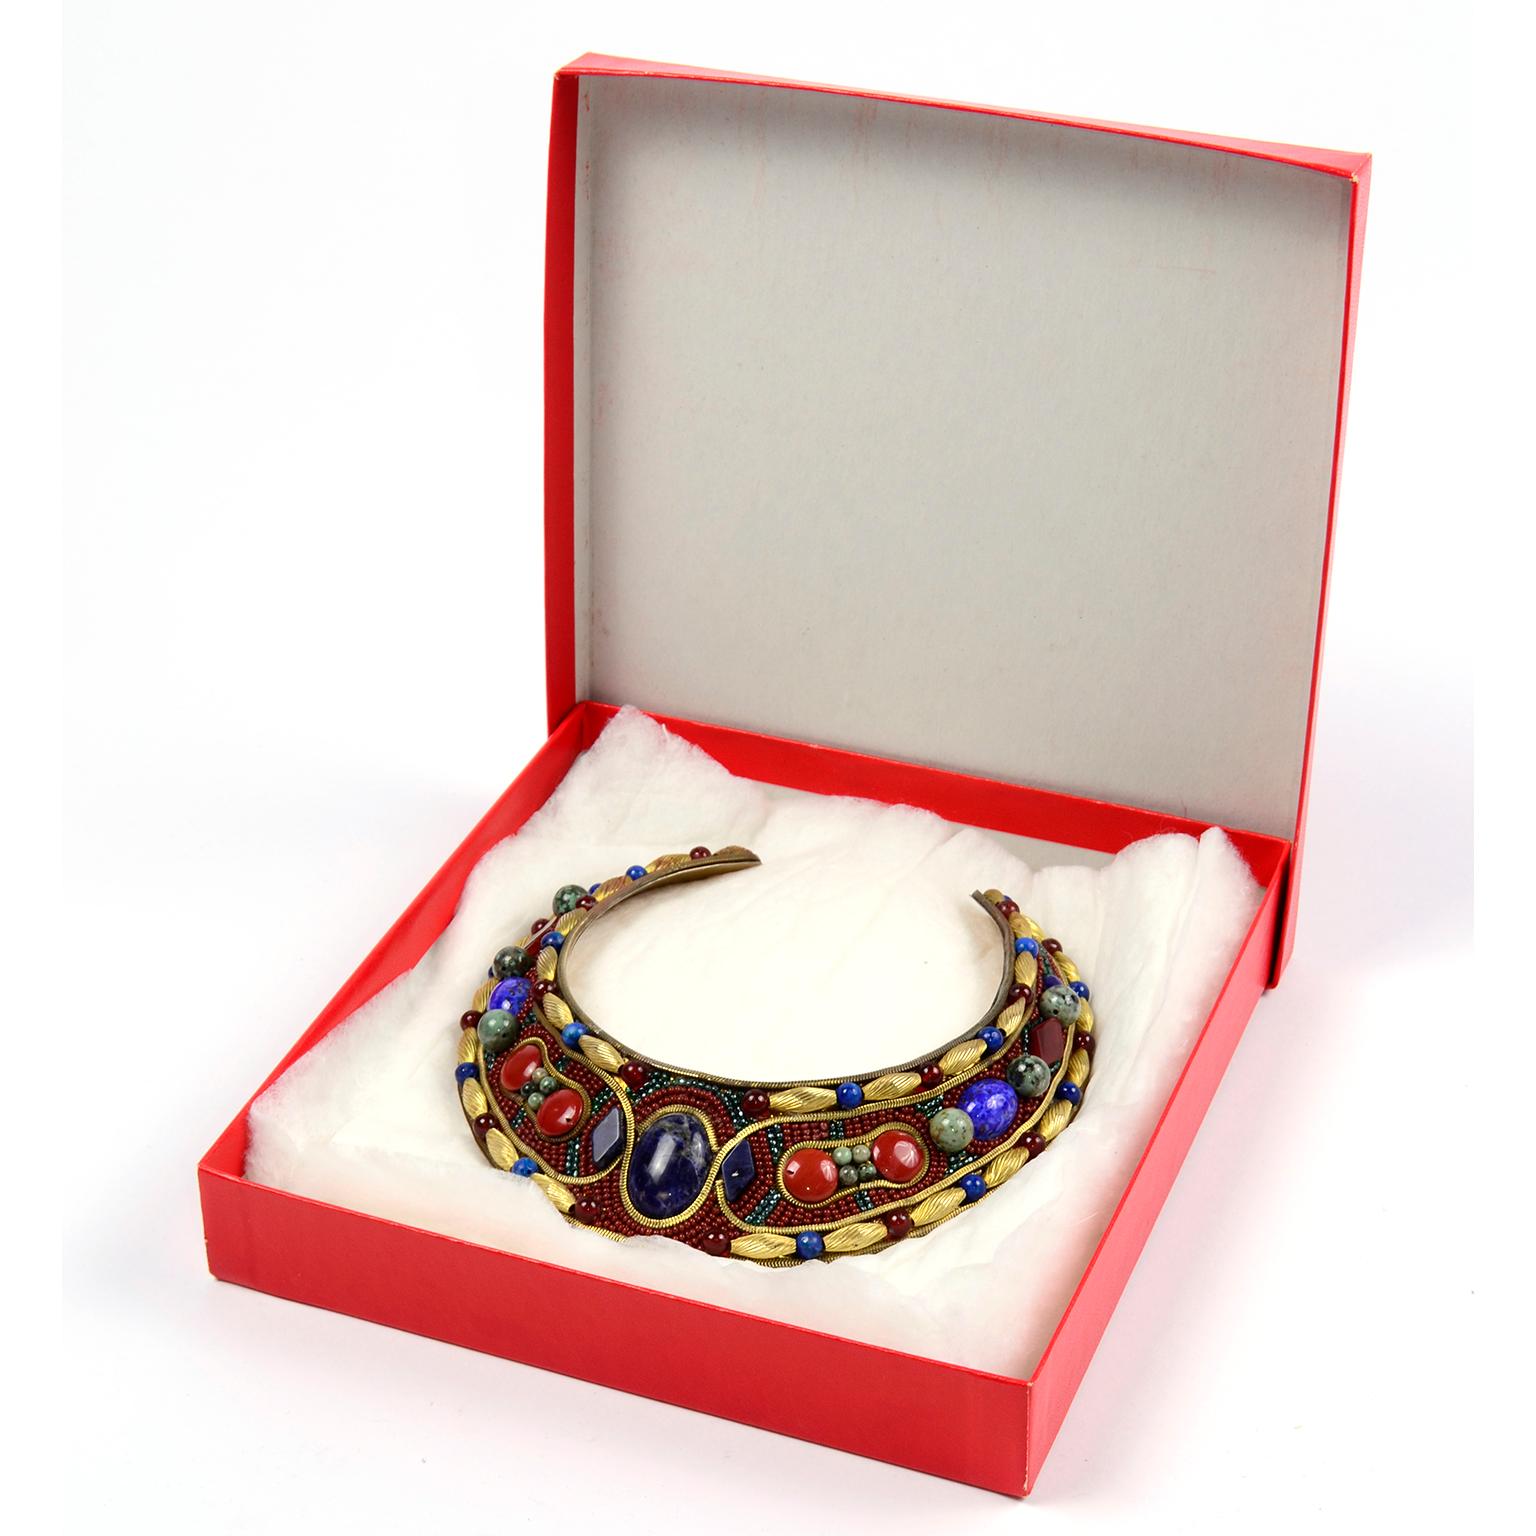 This unique, Egyptian style colorful vintage necklace was designed by MJ Hansen in 1988. This incredible brass choker collar necklace is covered with gold metalwork, beads and gorgeous gemstone cabochons, including a large center Lapis Lazuli. This